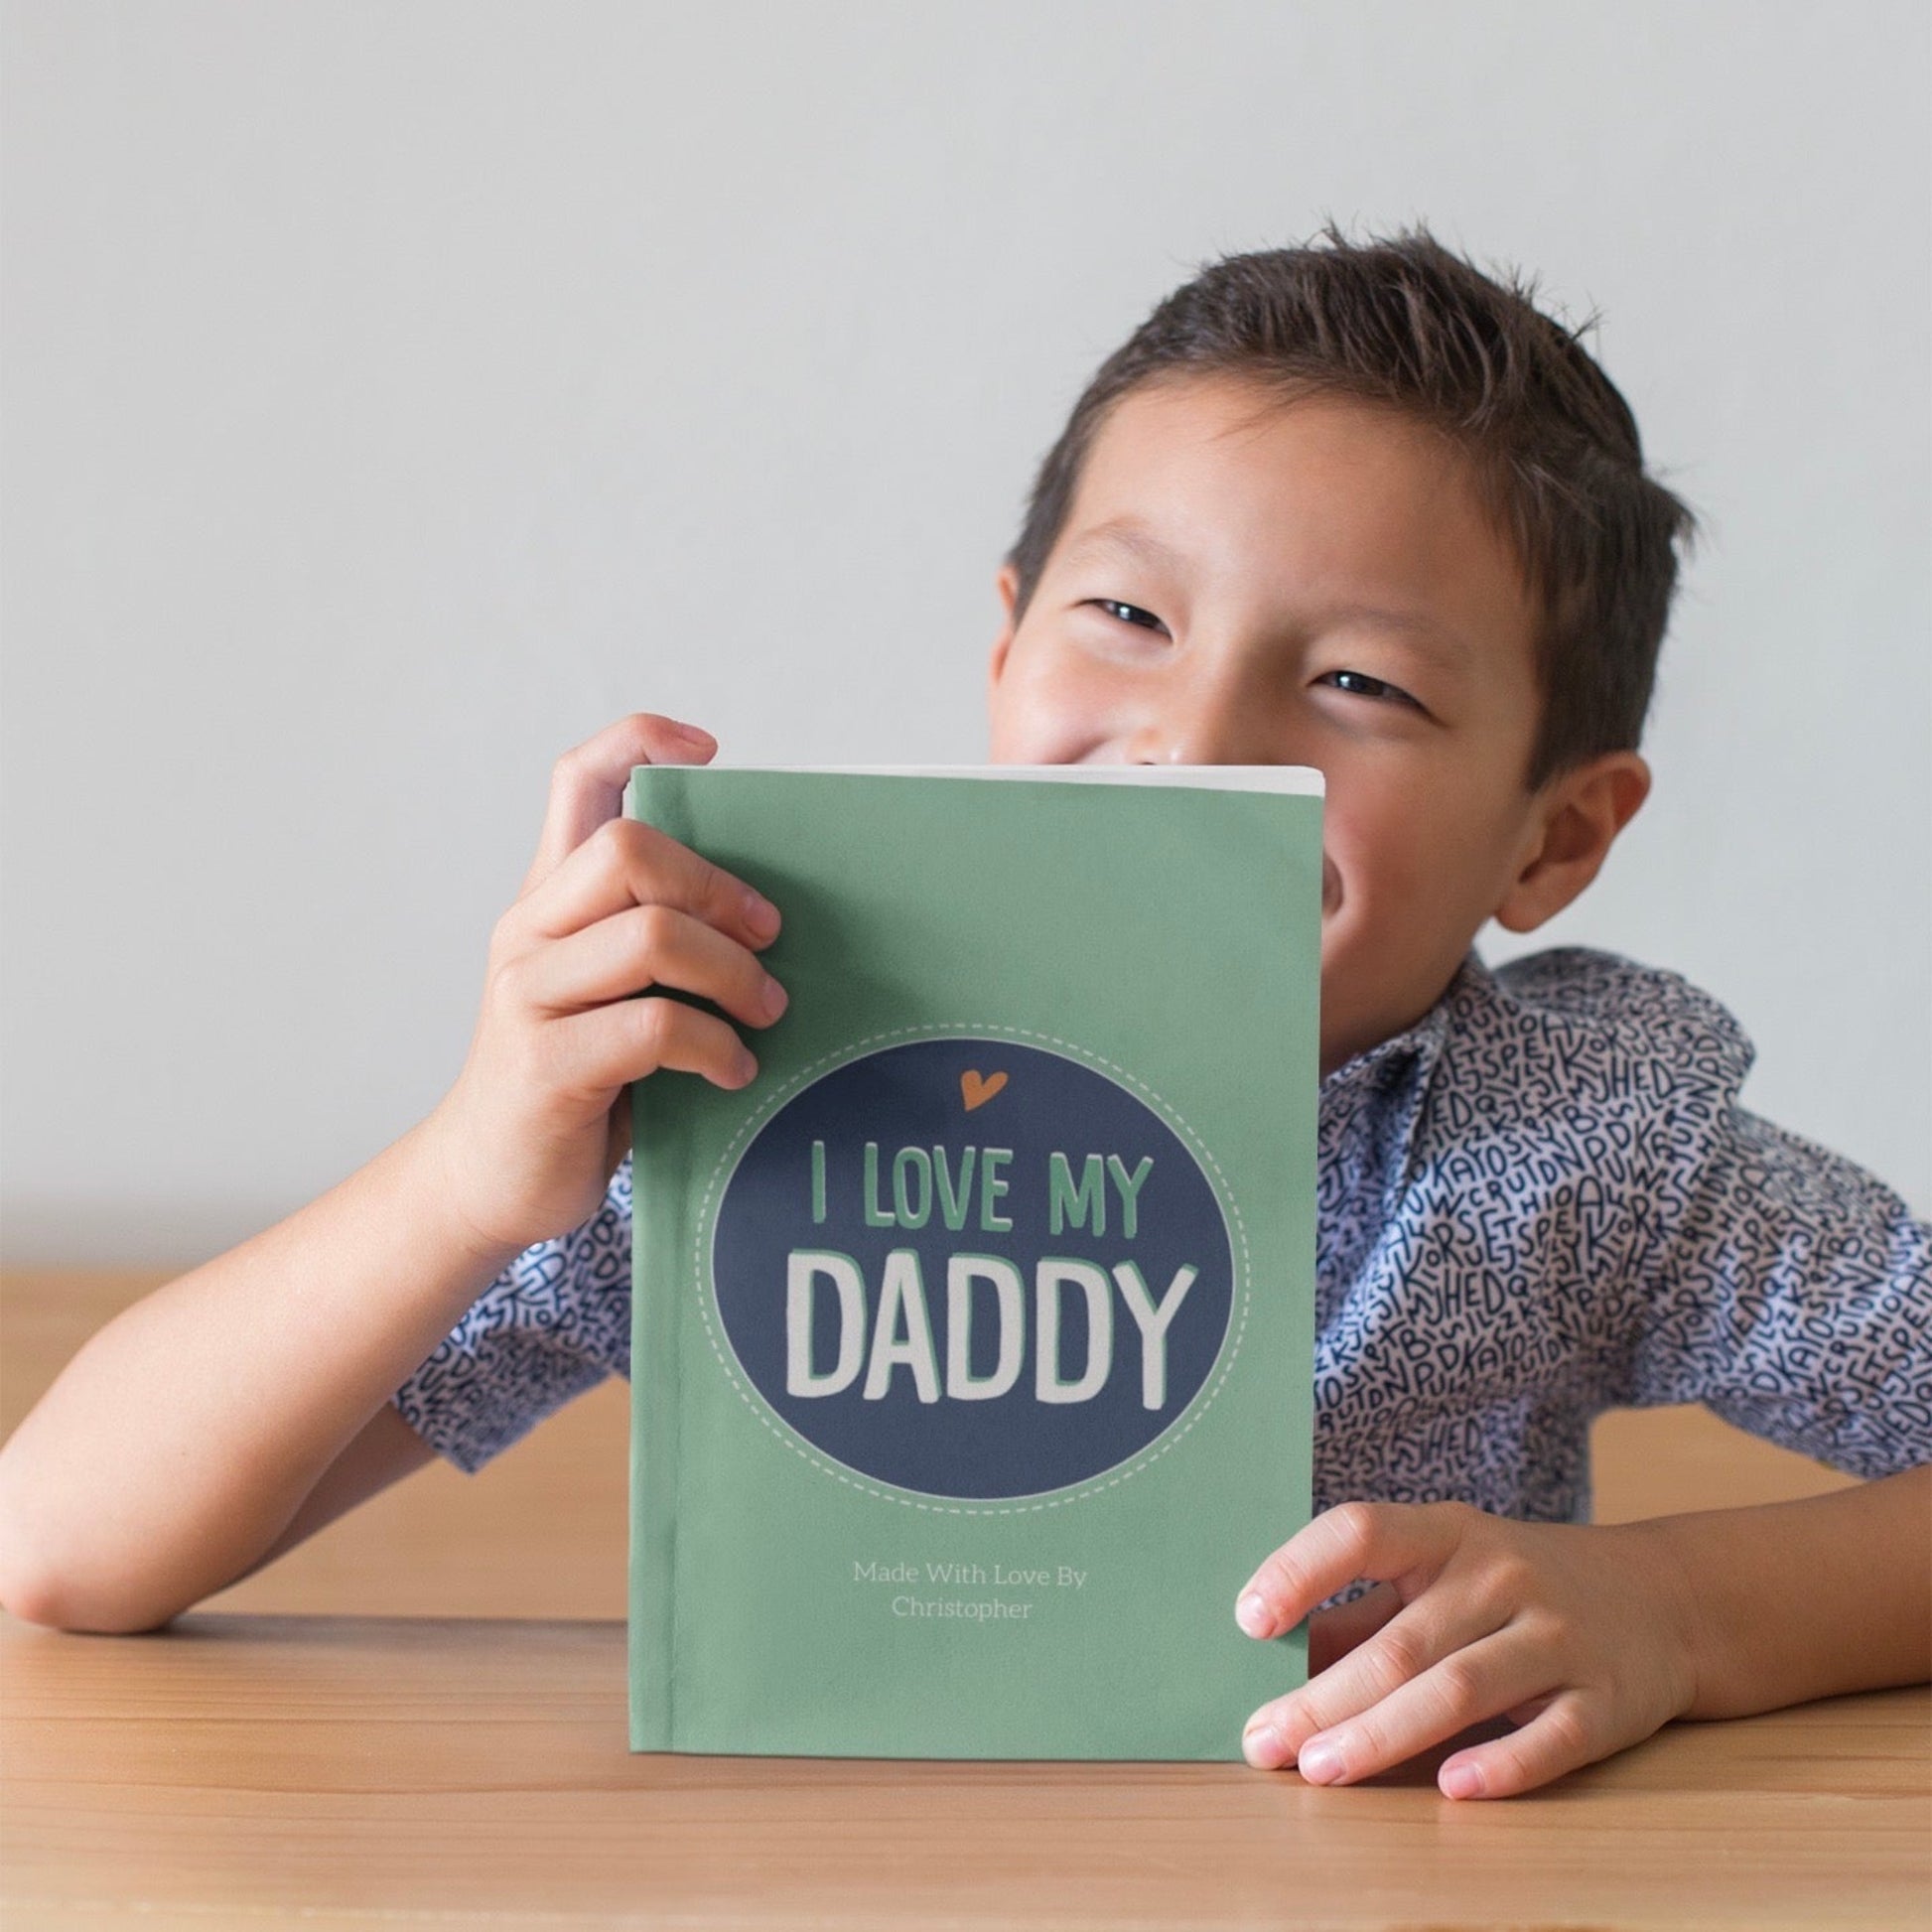 Custom book for daddy. Personalized book for dad. Gift for dad from kids. Luhvee Books.